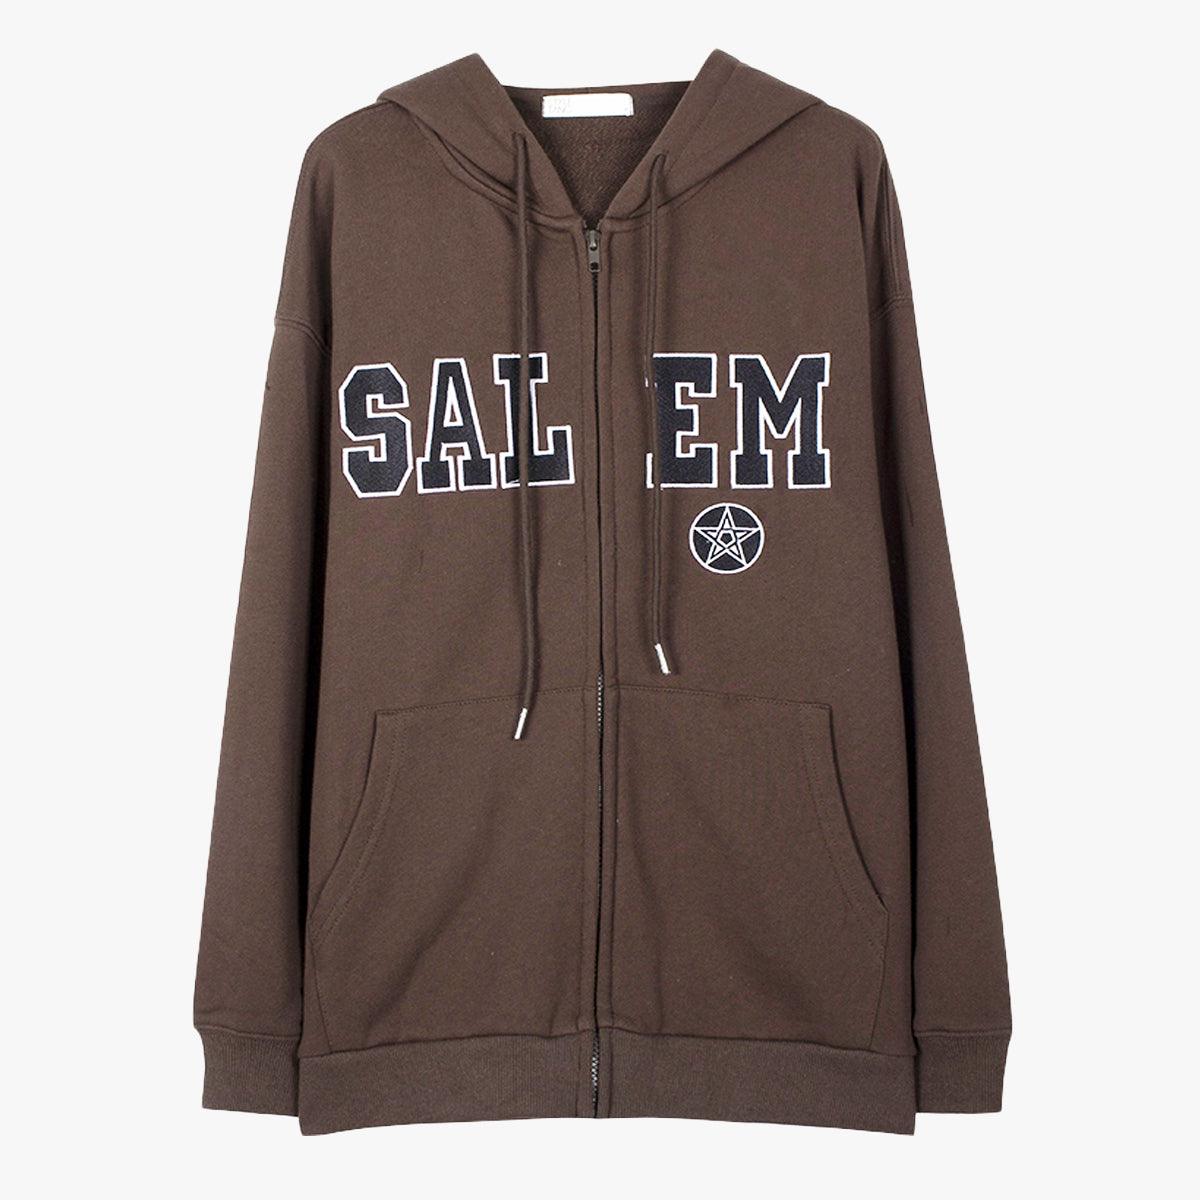 Salem Team College Style Hoodie - Aesthetic Clothes Shop